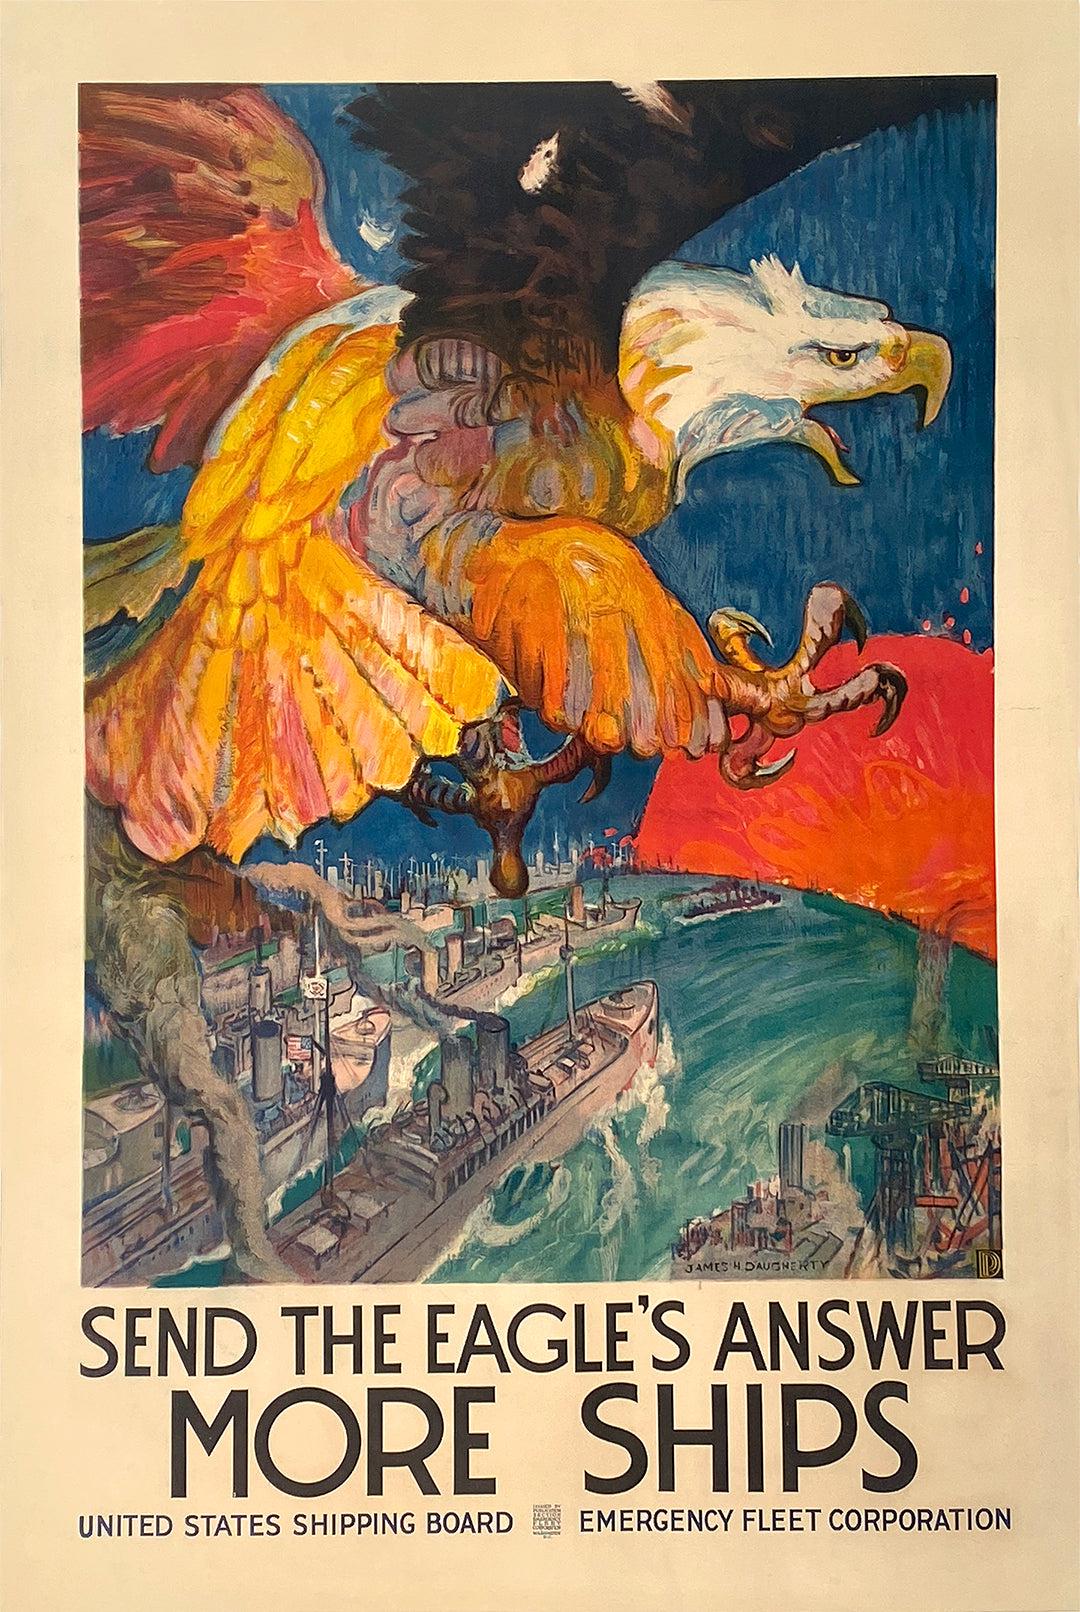 Original Vintage WWI Poster Send the Eagle's Answer More Ships by Daugherty c1918